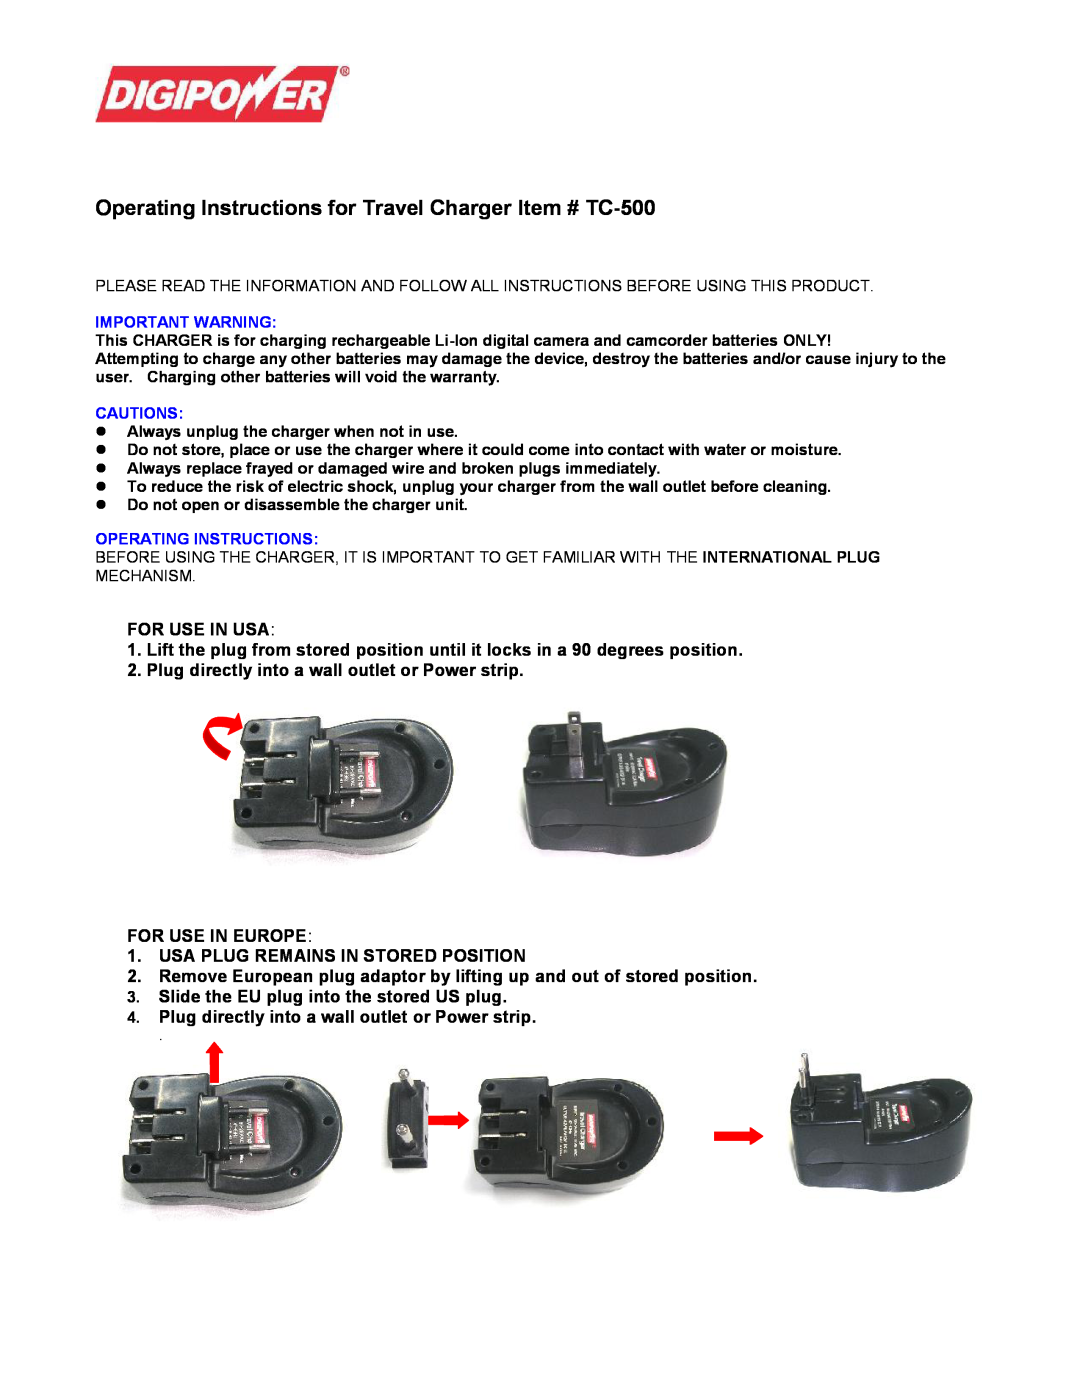 DigiPower operating instructions Operating Instructions for Travel Charger Item # TC-500, For Use In Usa, Cautions 